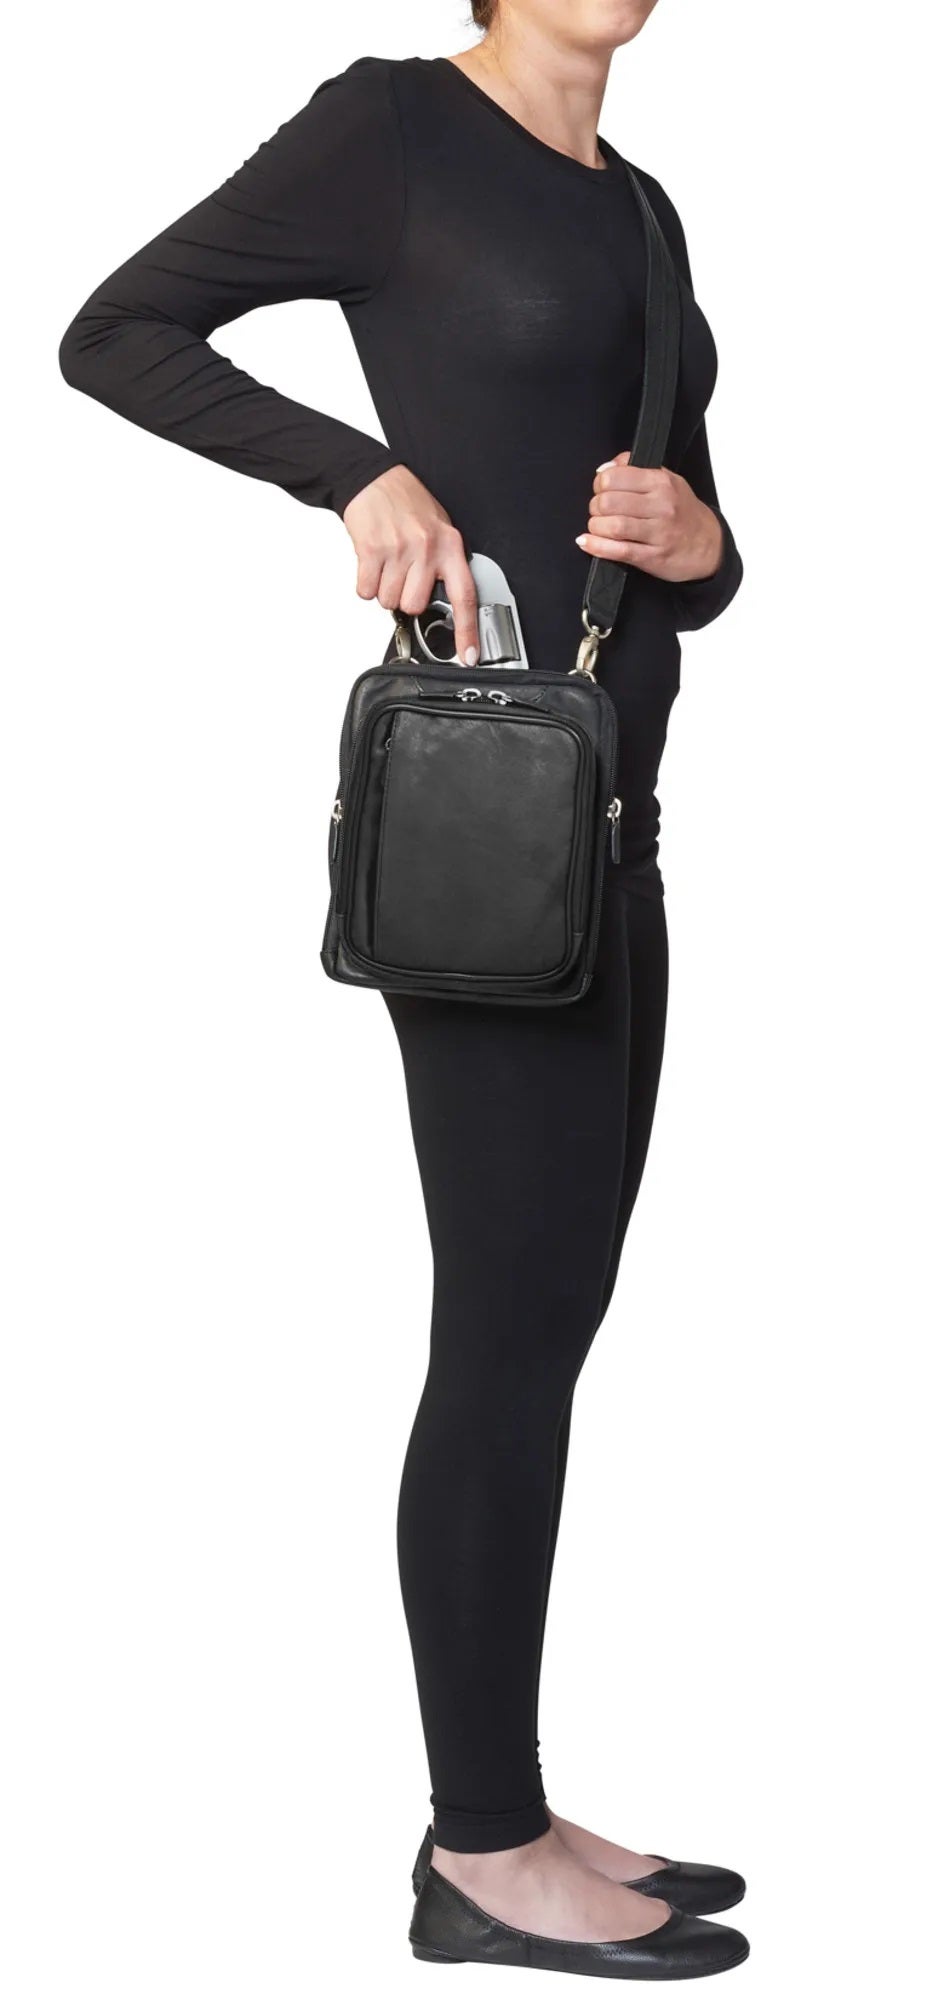 New Concealed Carry Handbags for Women from Primary Arms